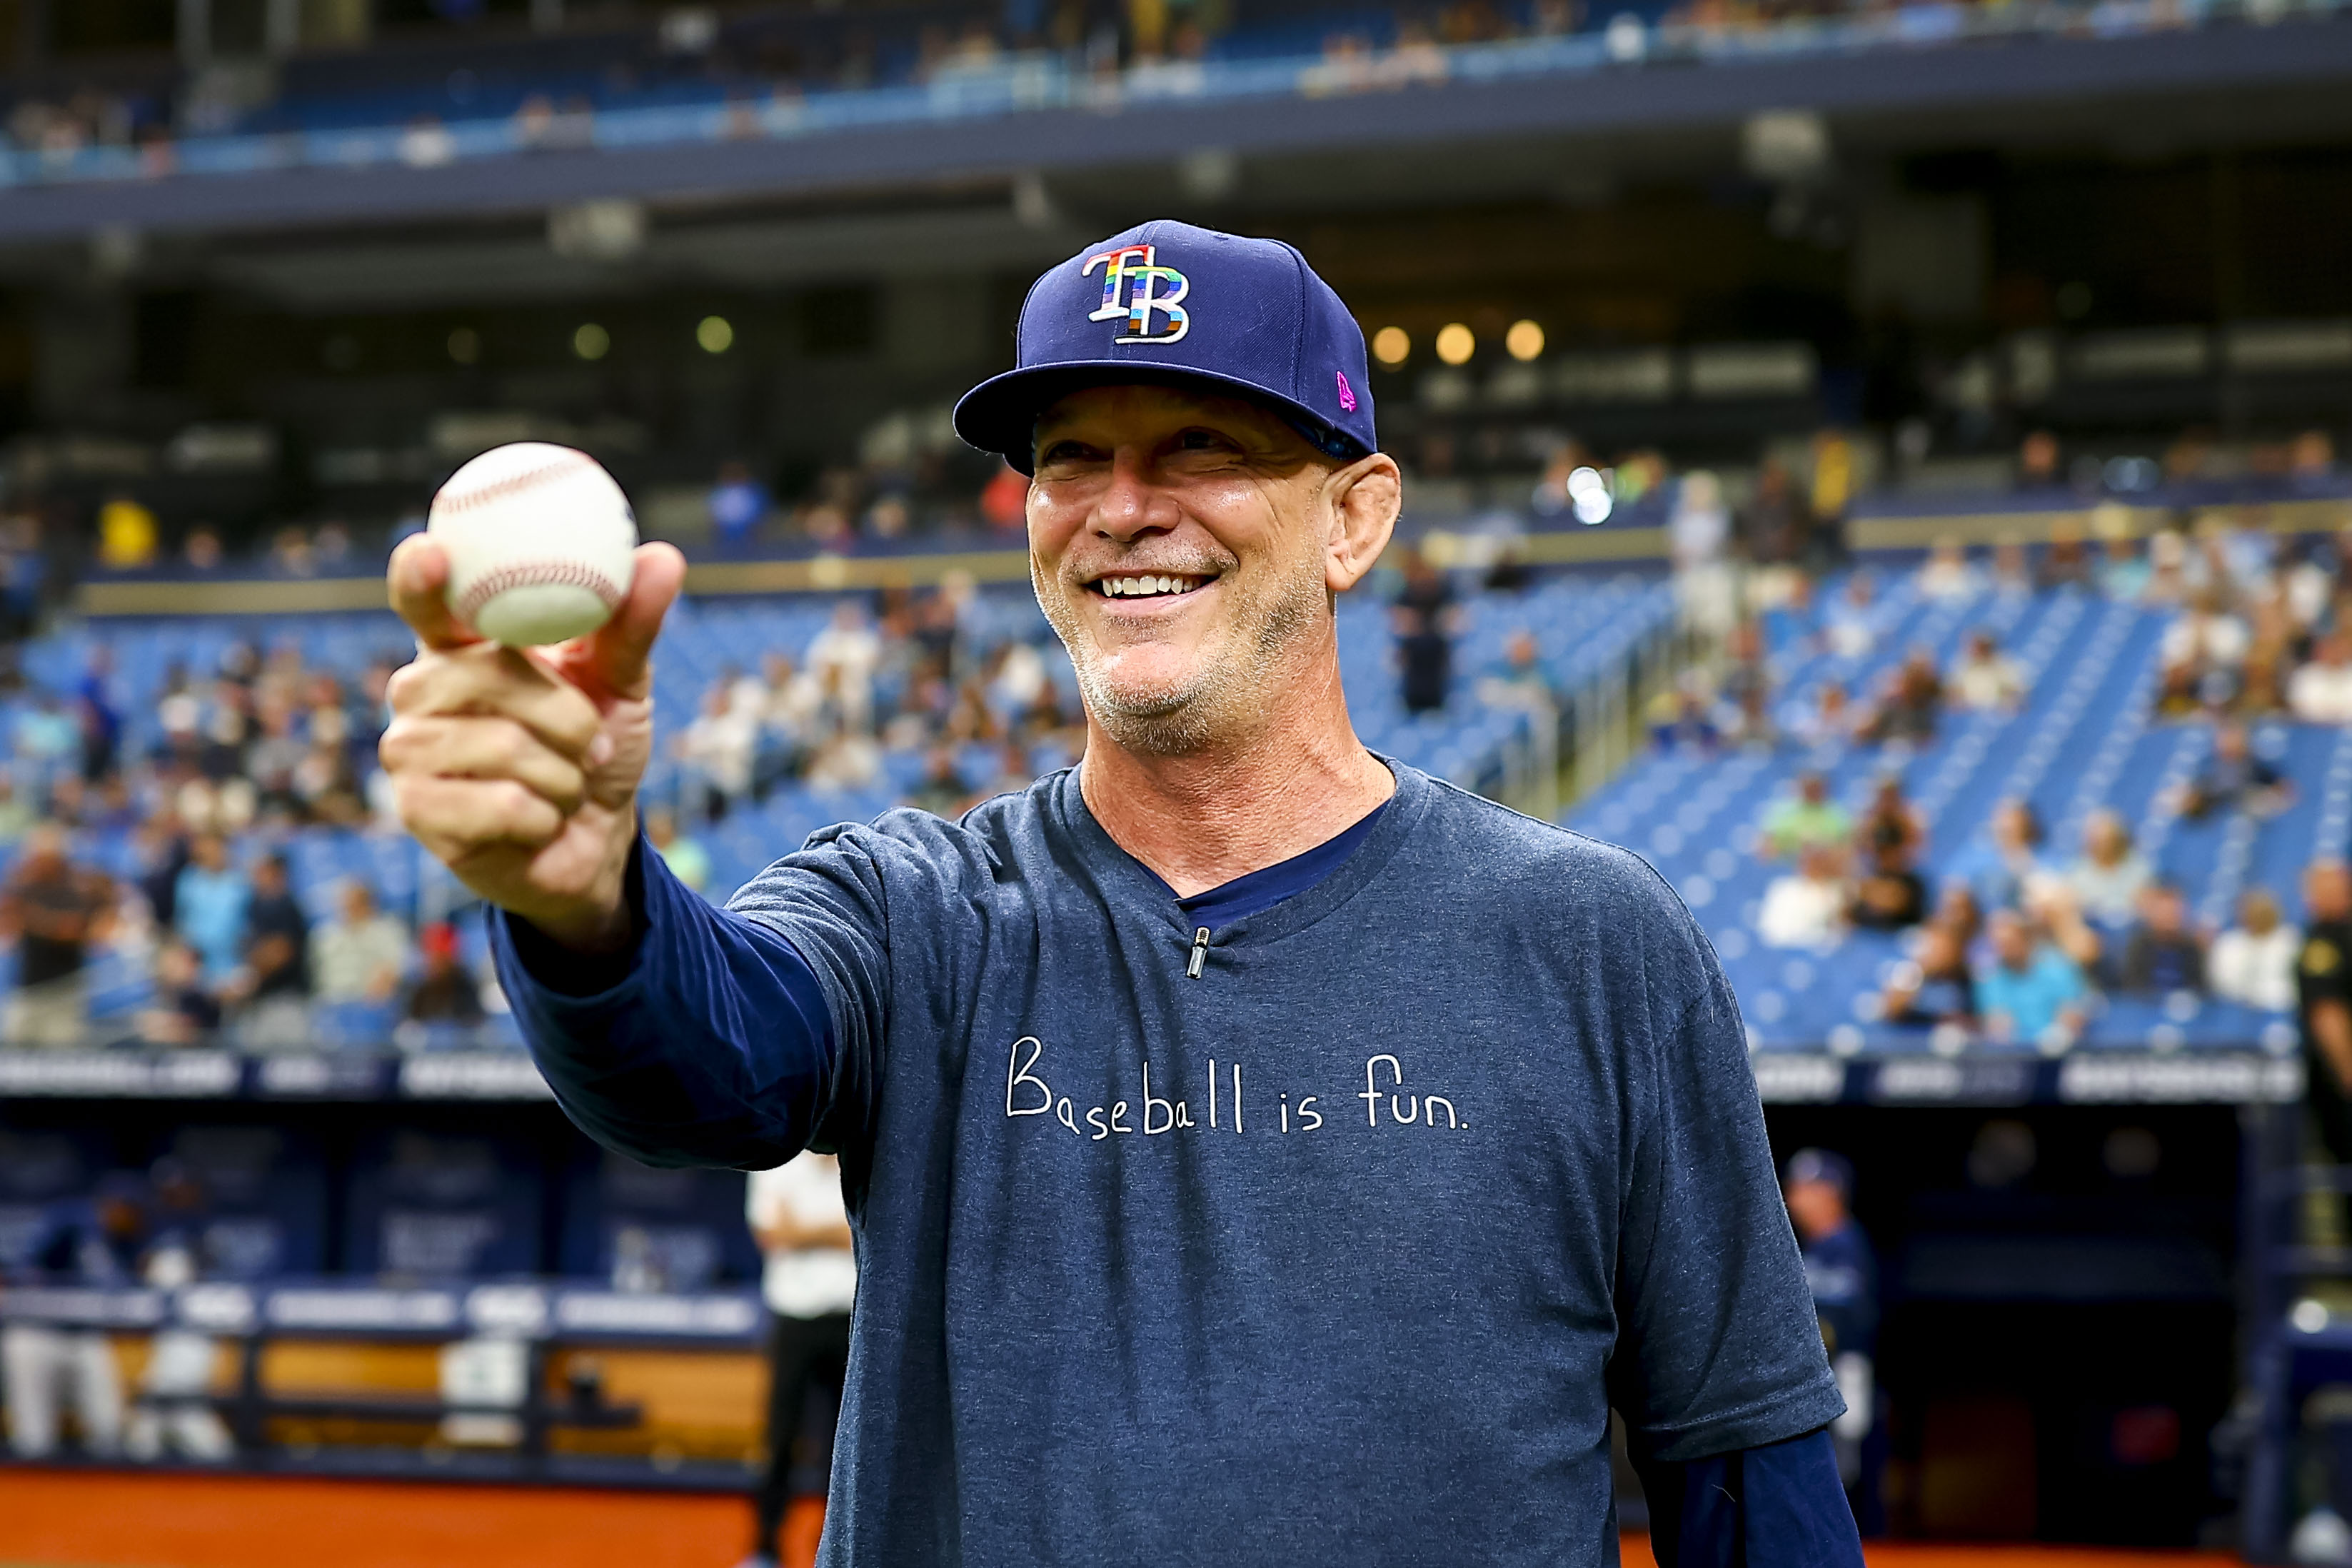 Paul Lamison's daughter throws first pitch as Rays remember life and legacy  of WFLA's Chief Photojournalist